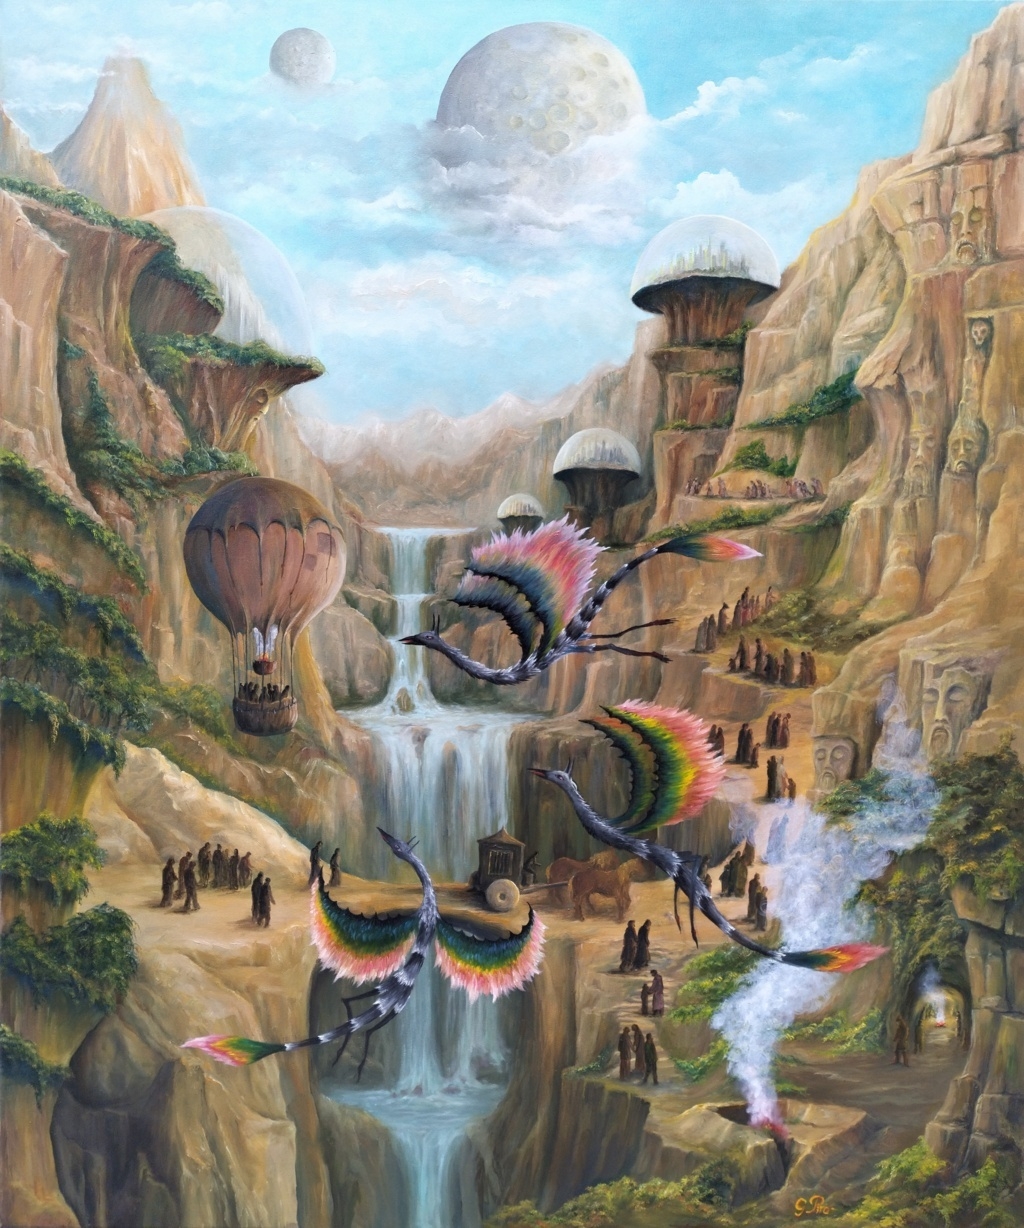 artwork, gregory pyra piro, surrealist landscape, extraterrestrial realm, colorful dragons, inhabitants, caves, fire, hills, mountains, dome-shaped structures, transportation methods, gas balloons, horse carriages, lakes, waterfalls, streams, stone faces, mystique, sky, moons, artist's signature, prints